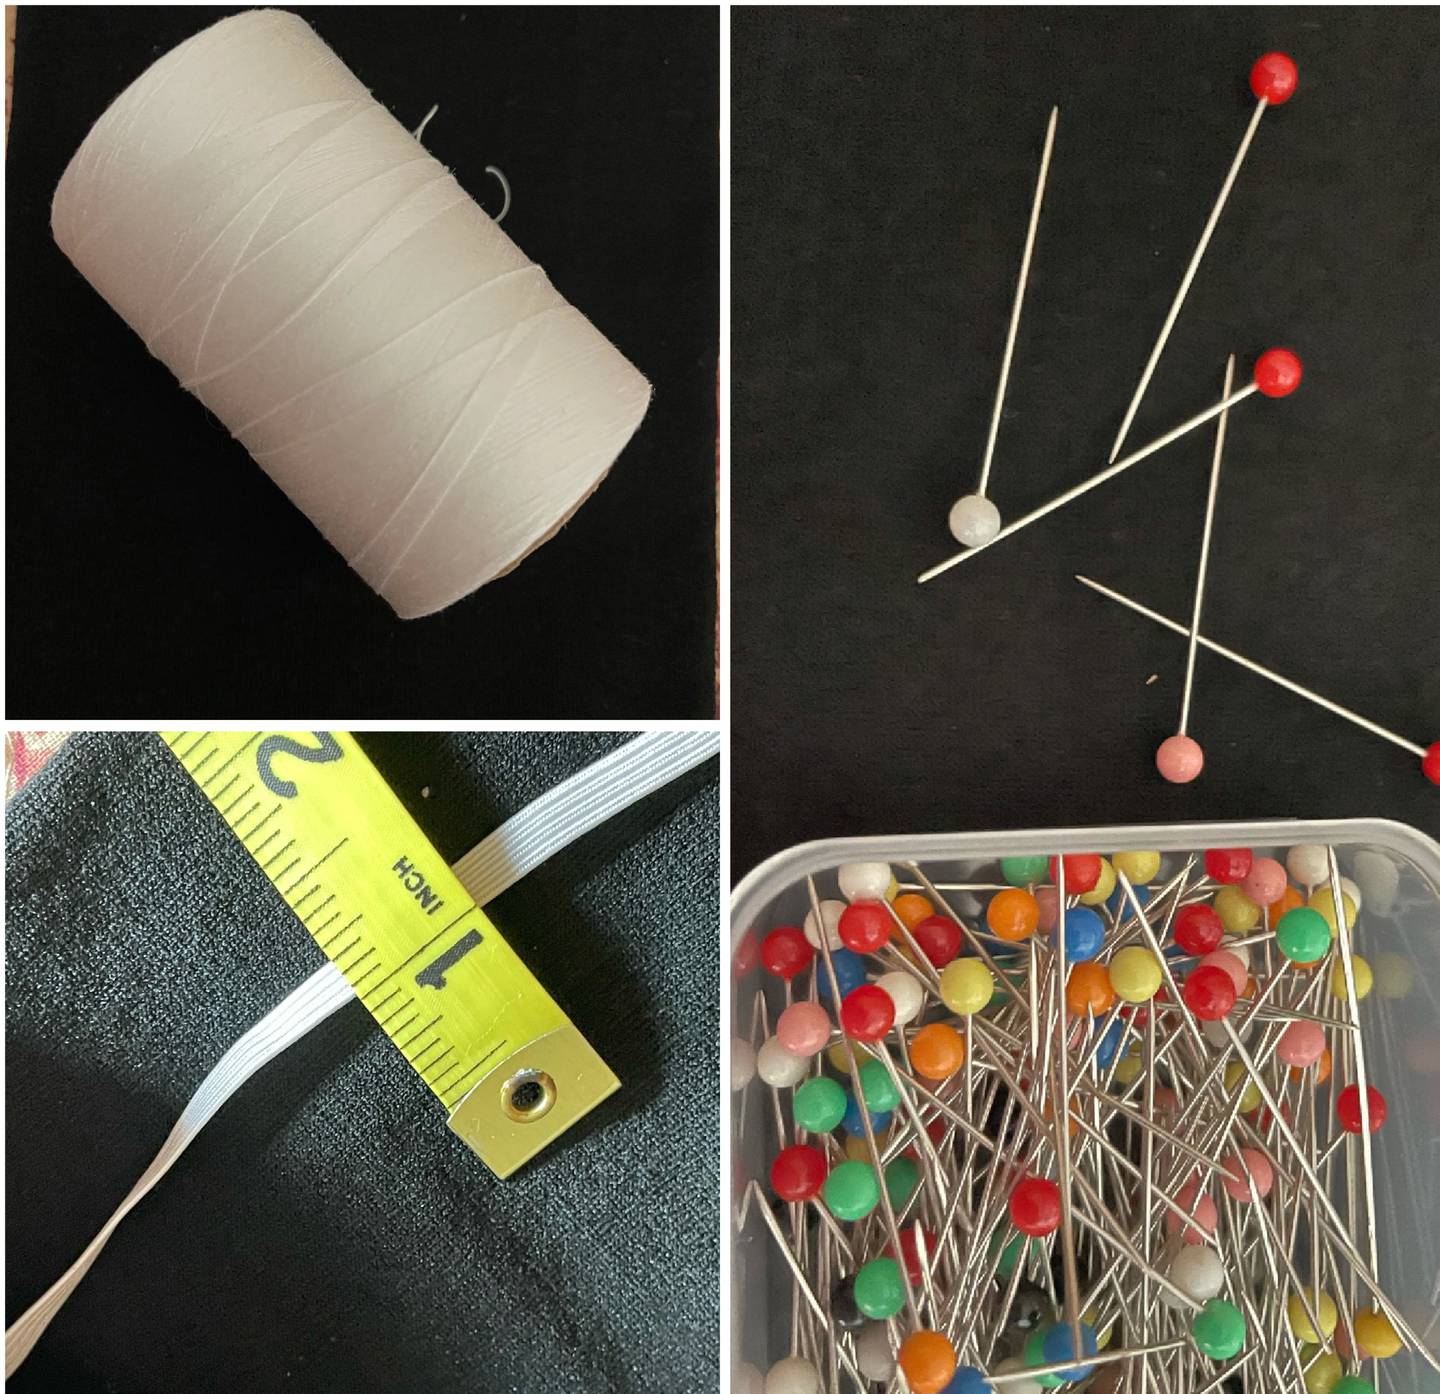 Pictured are the white quilting thread, rubber bands and straight pins Joliet's Kimberly Creasey and her team are using to turn outdated surgical sheets into sleeping bags for Ukrainians in need.